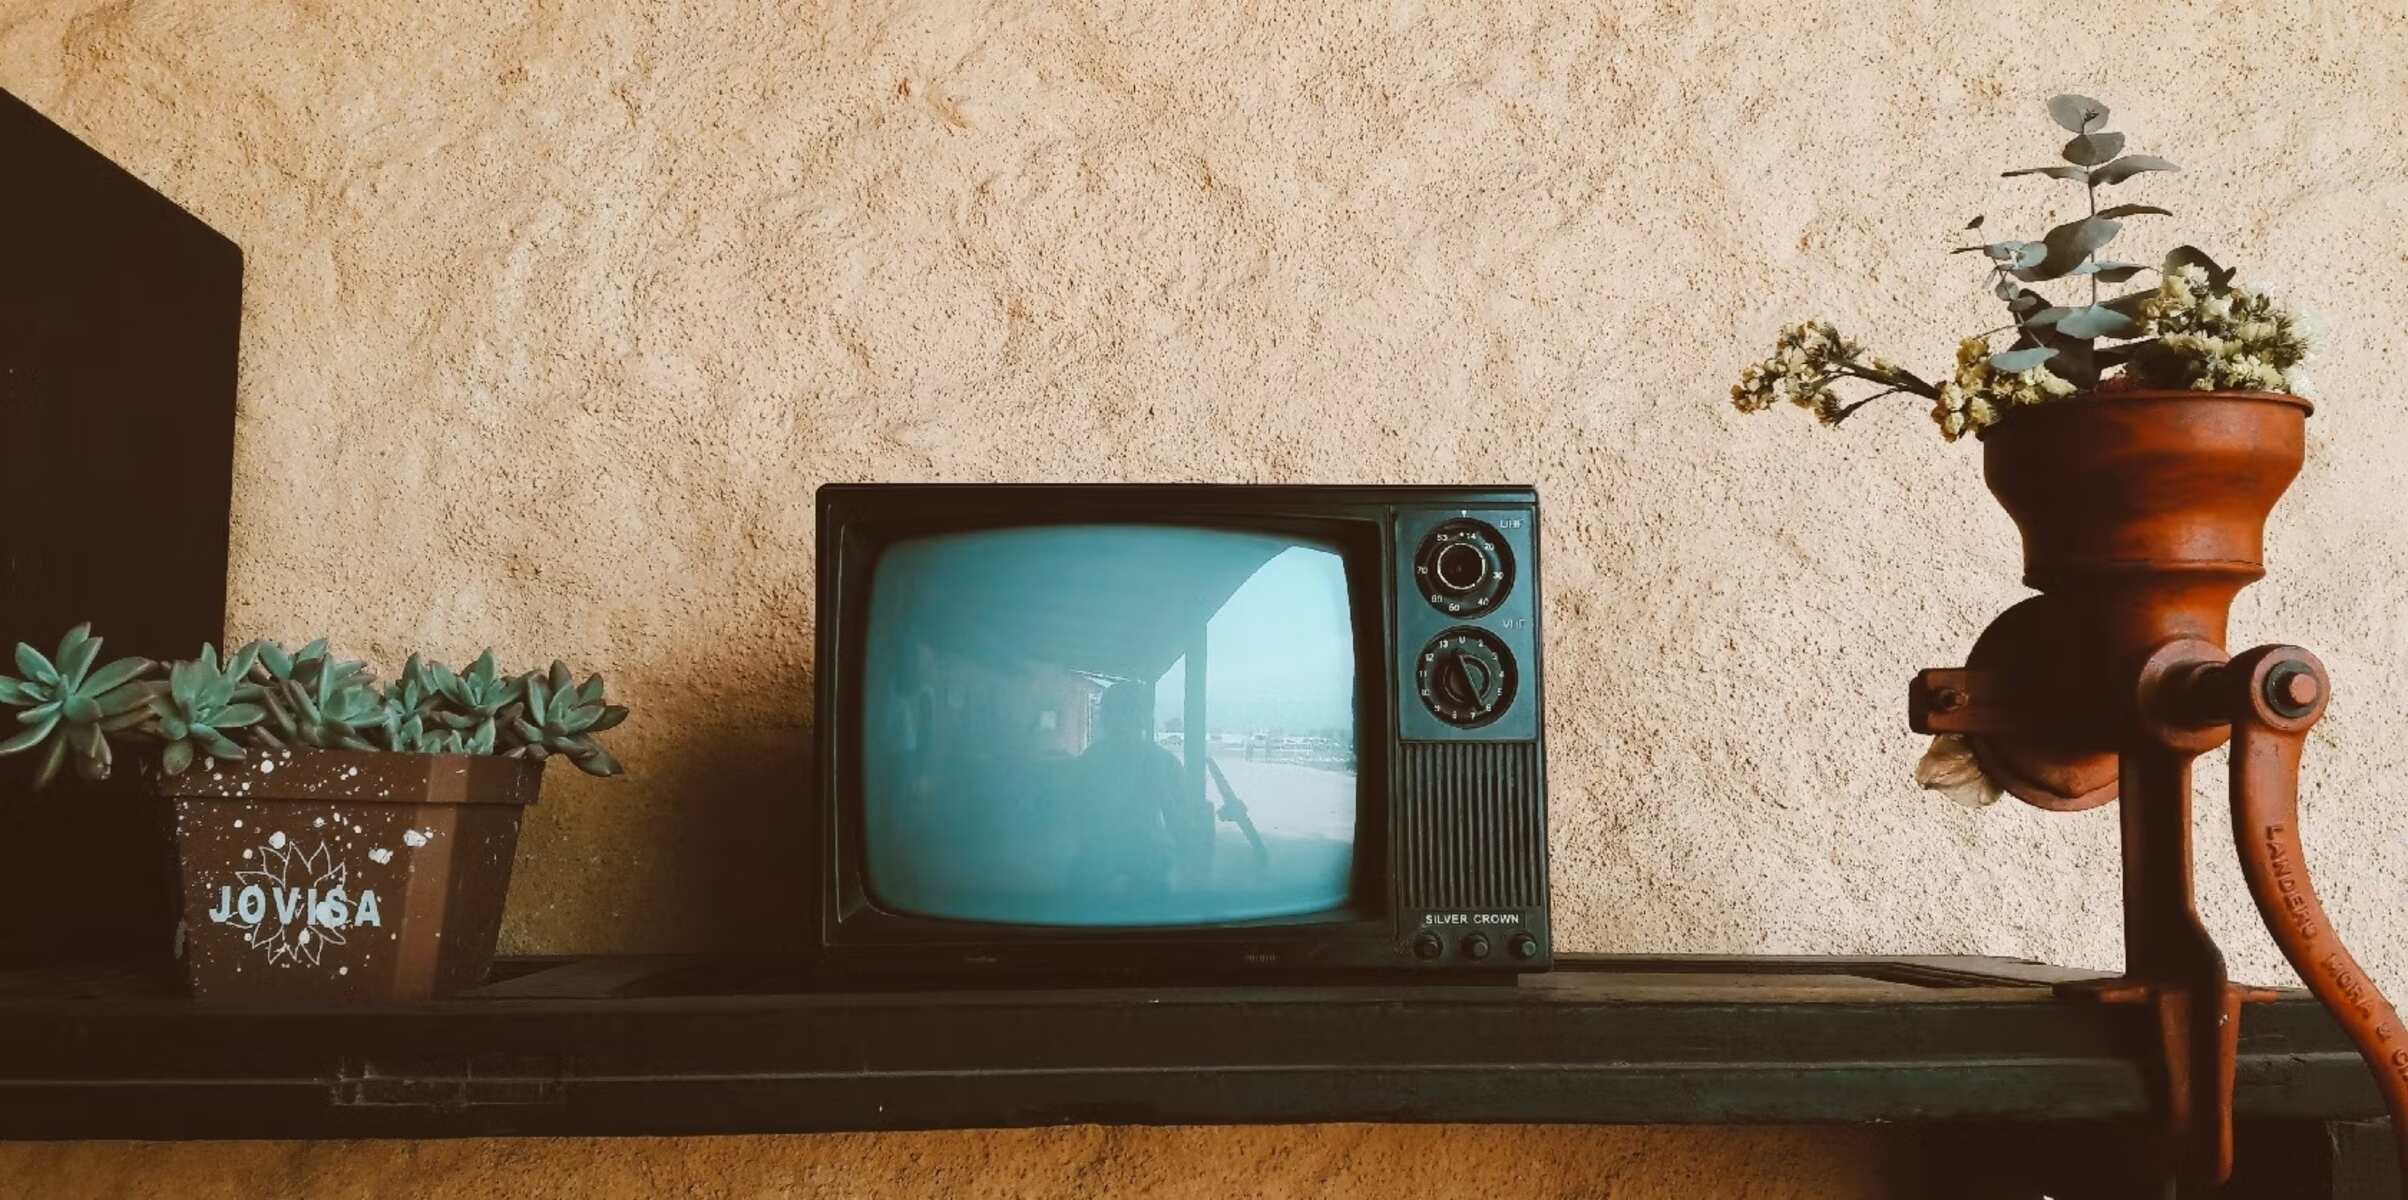 Can You Still Use An Analog TV?